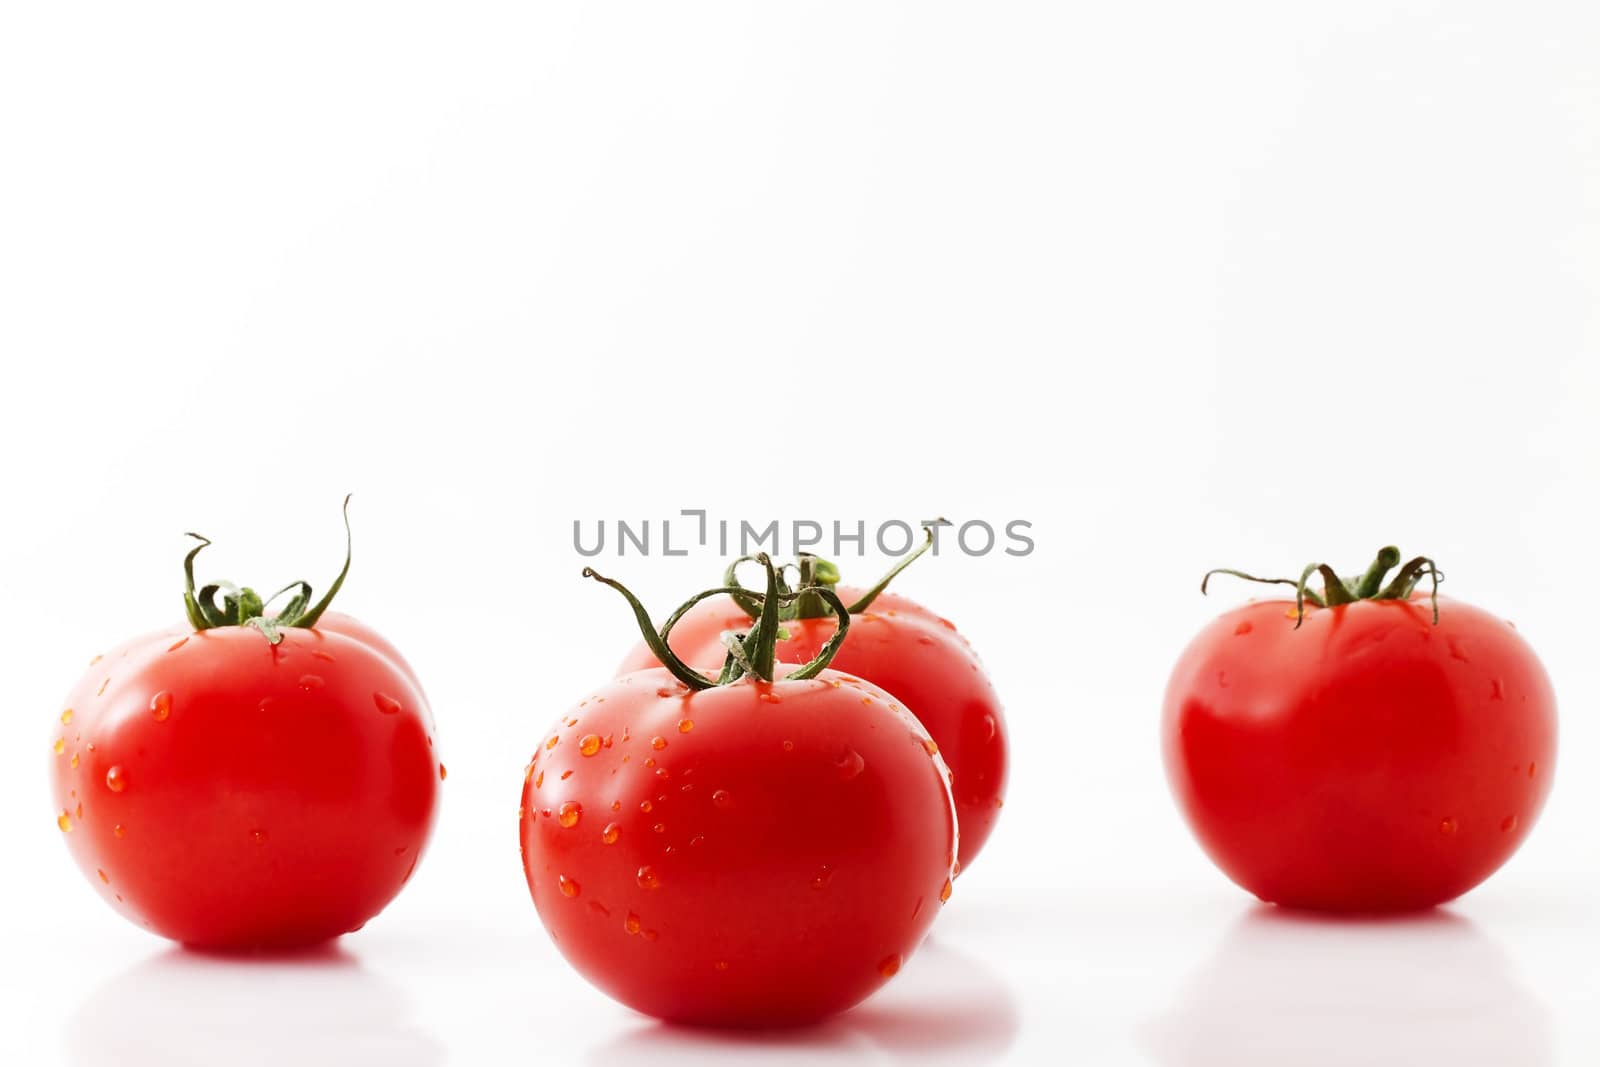 one tomato and three tomatoes on white background